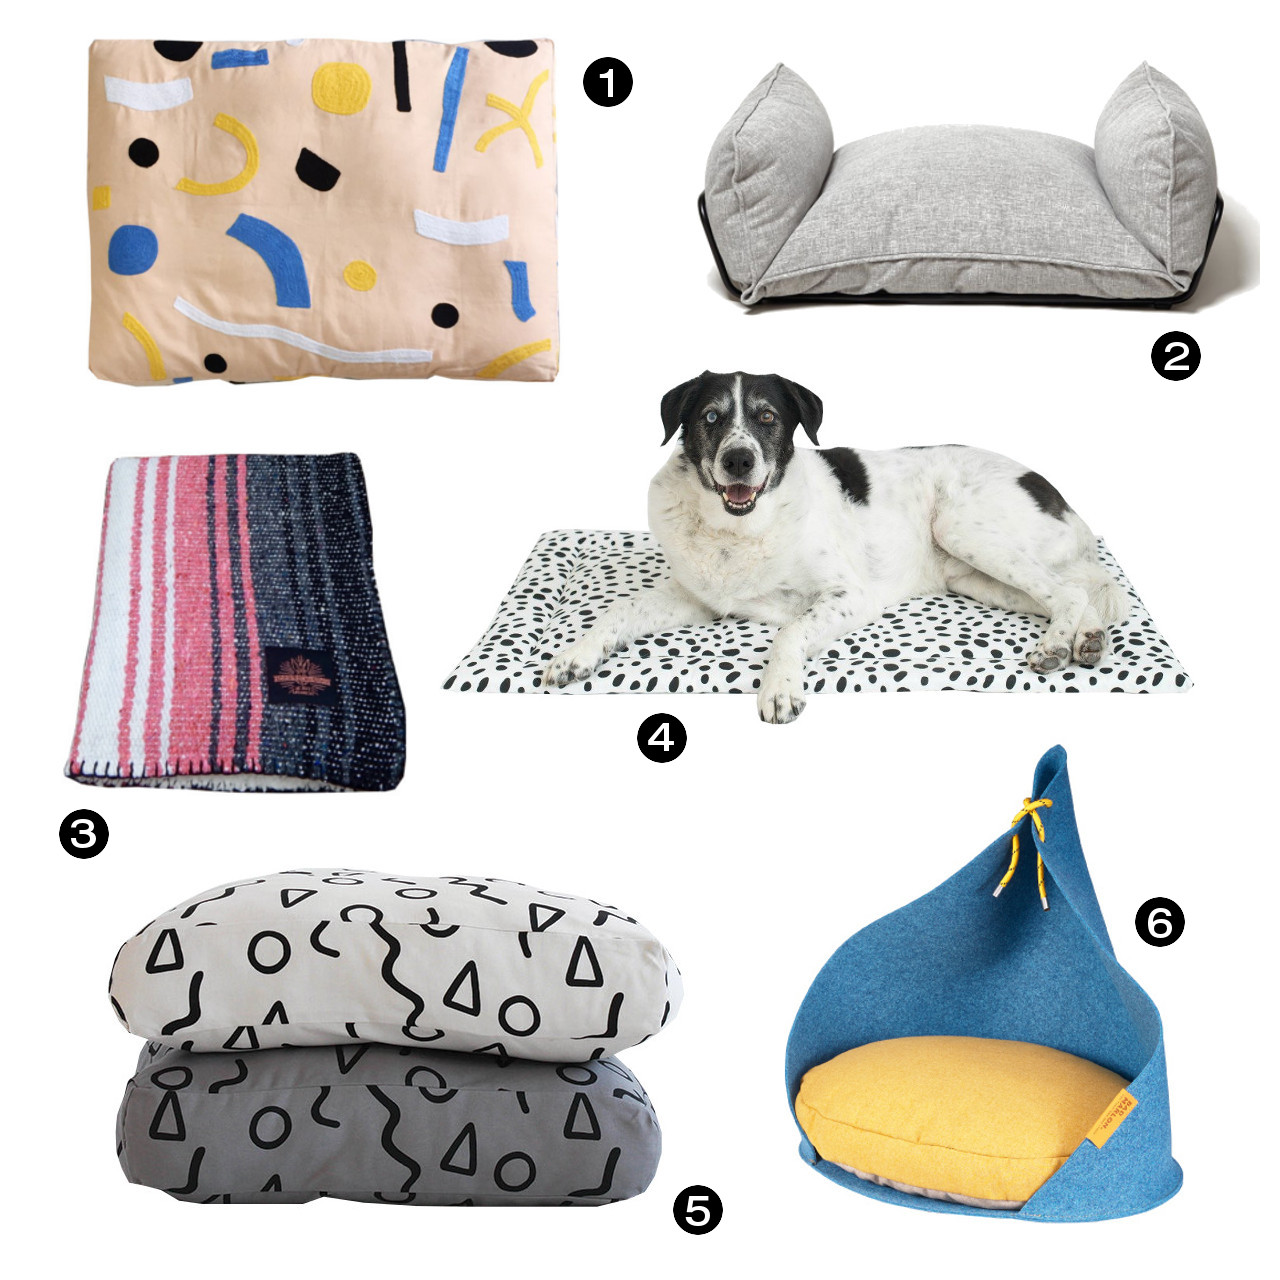 12 Holiday Gifts for Good Dogs